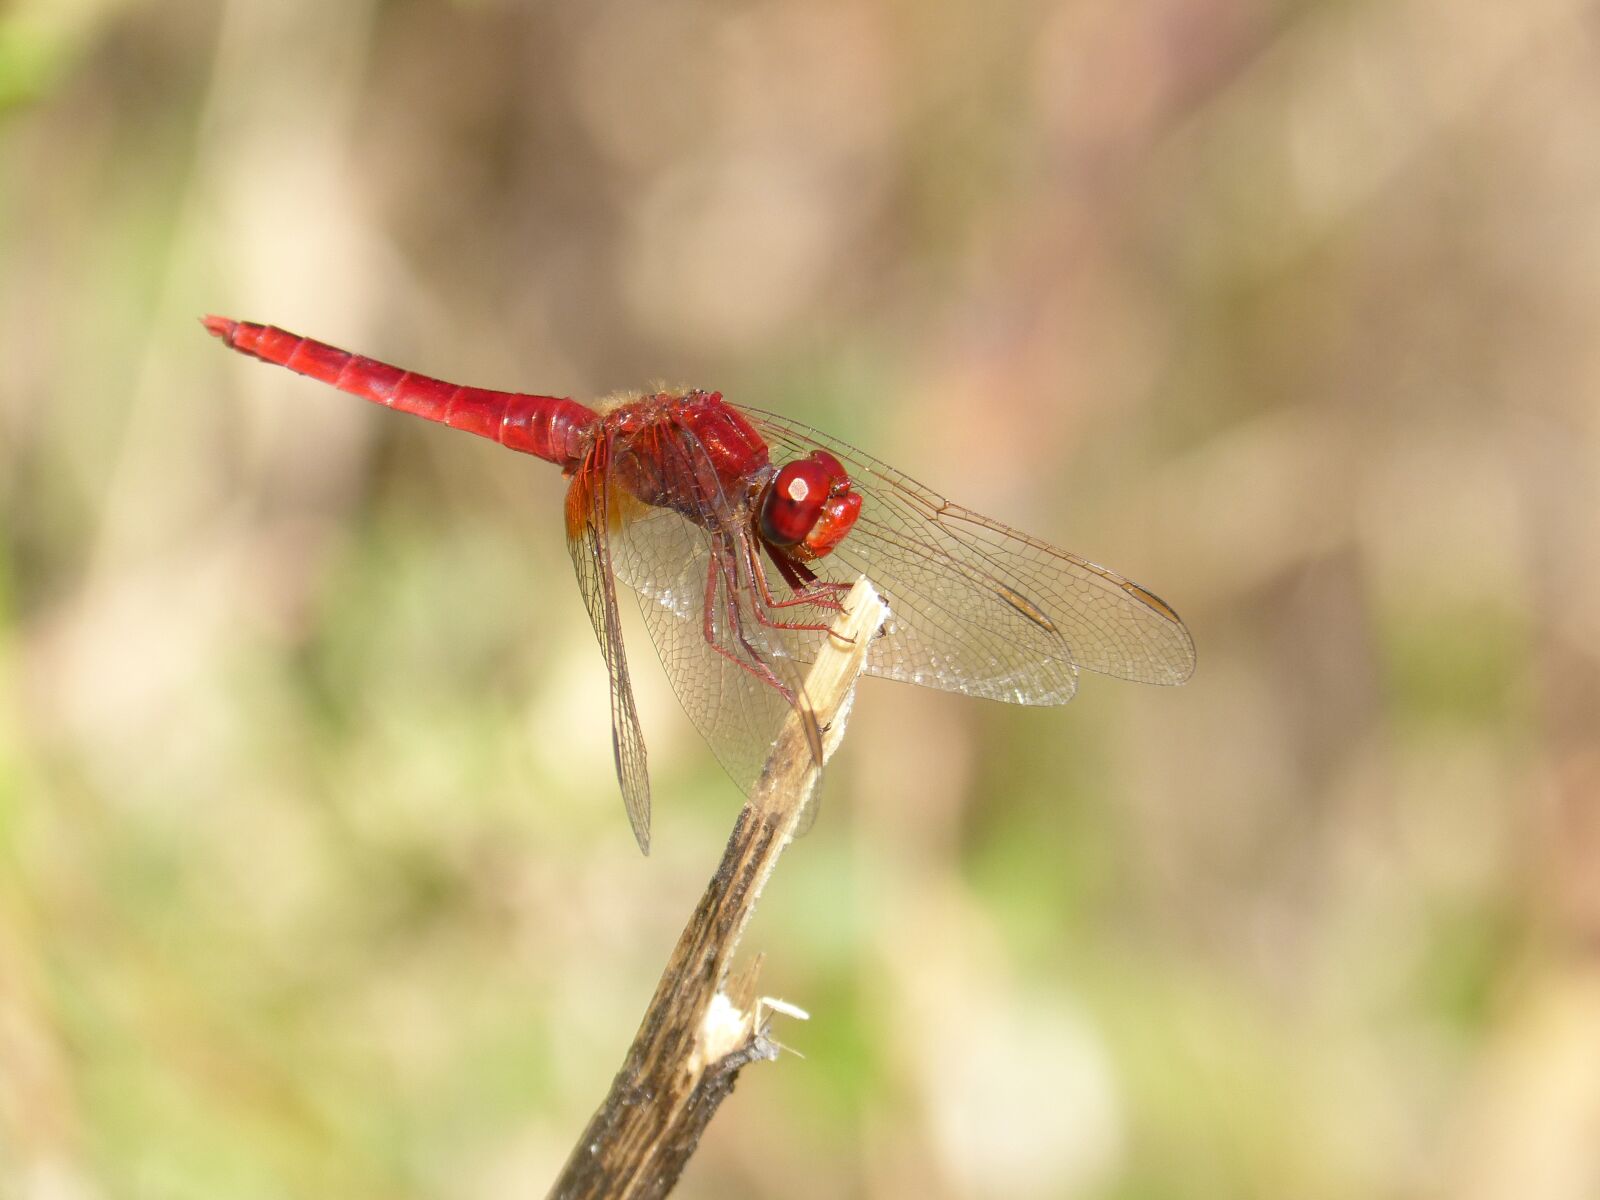 Panasonic DMC-FZ62 sample photo. Dragonfly, red dragonfly, insect photography